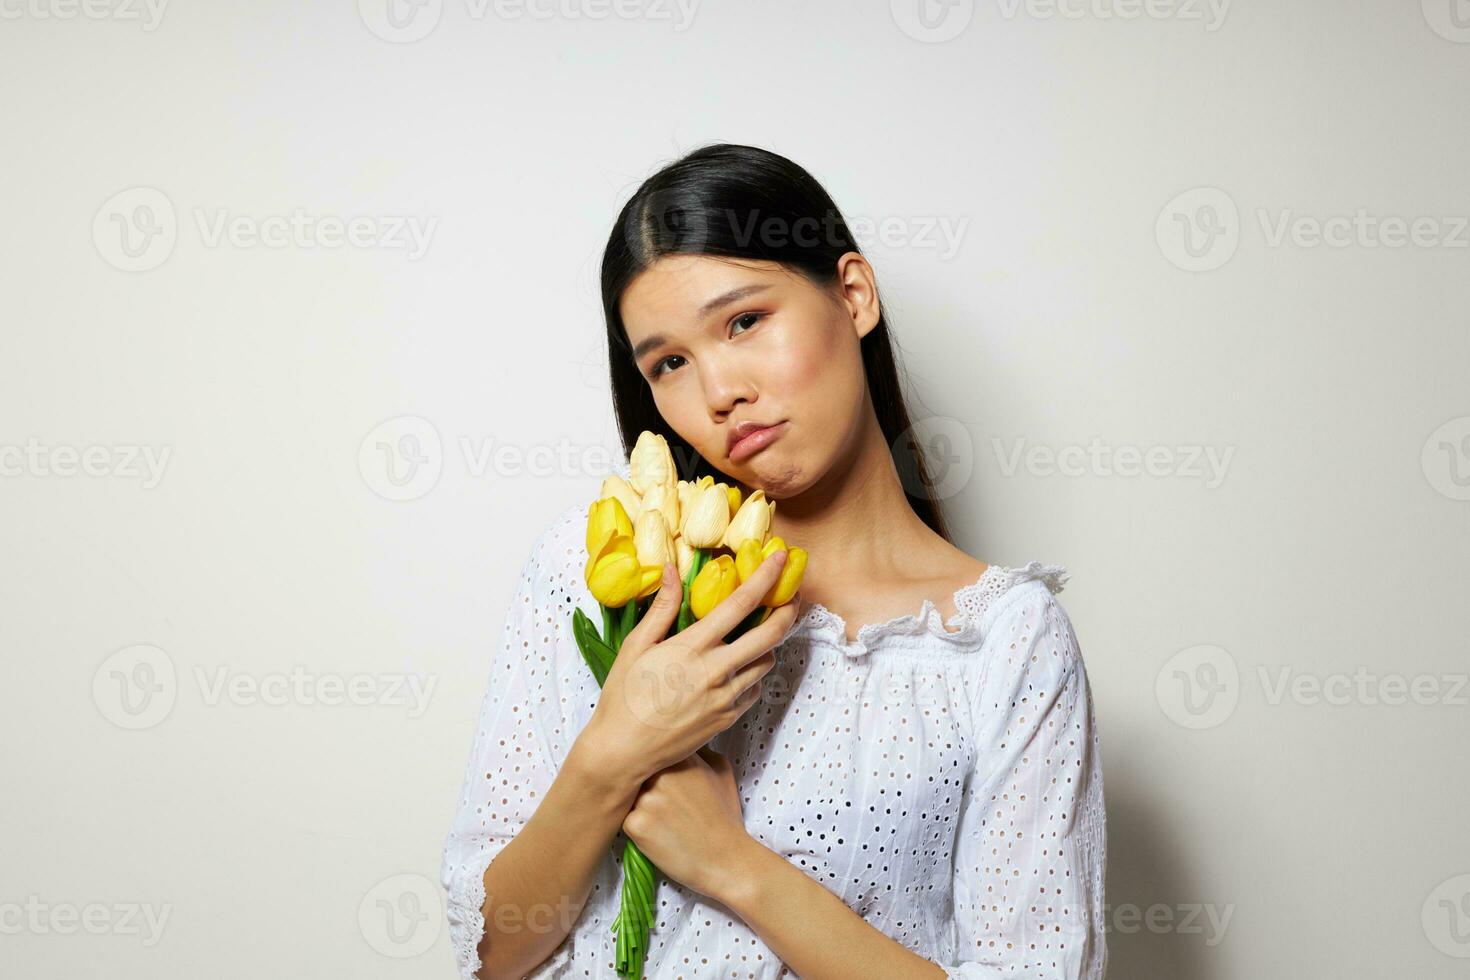 woman in a white shirt flowers spring posing light background unaltered photo